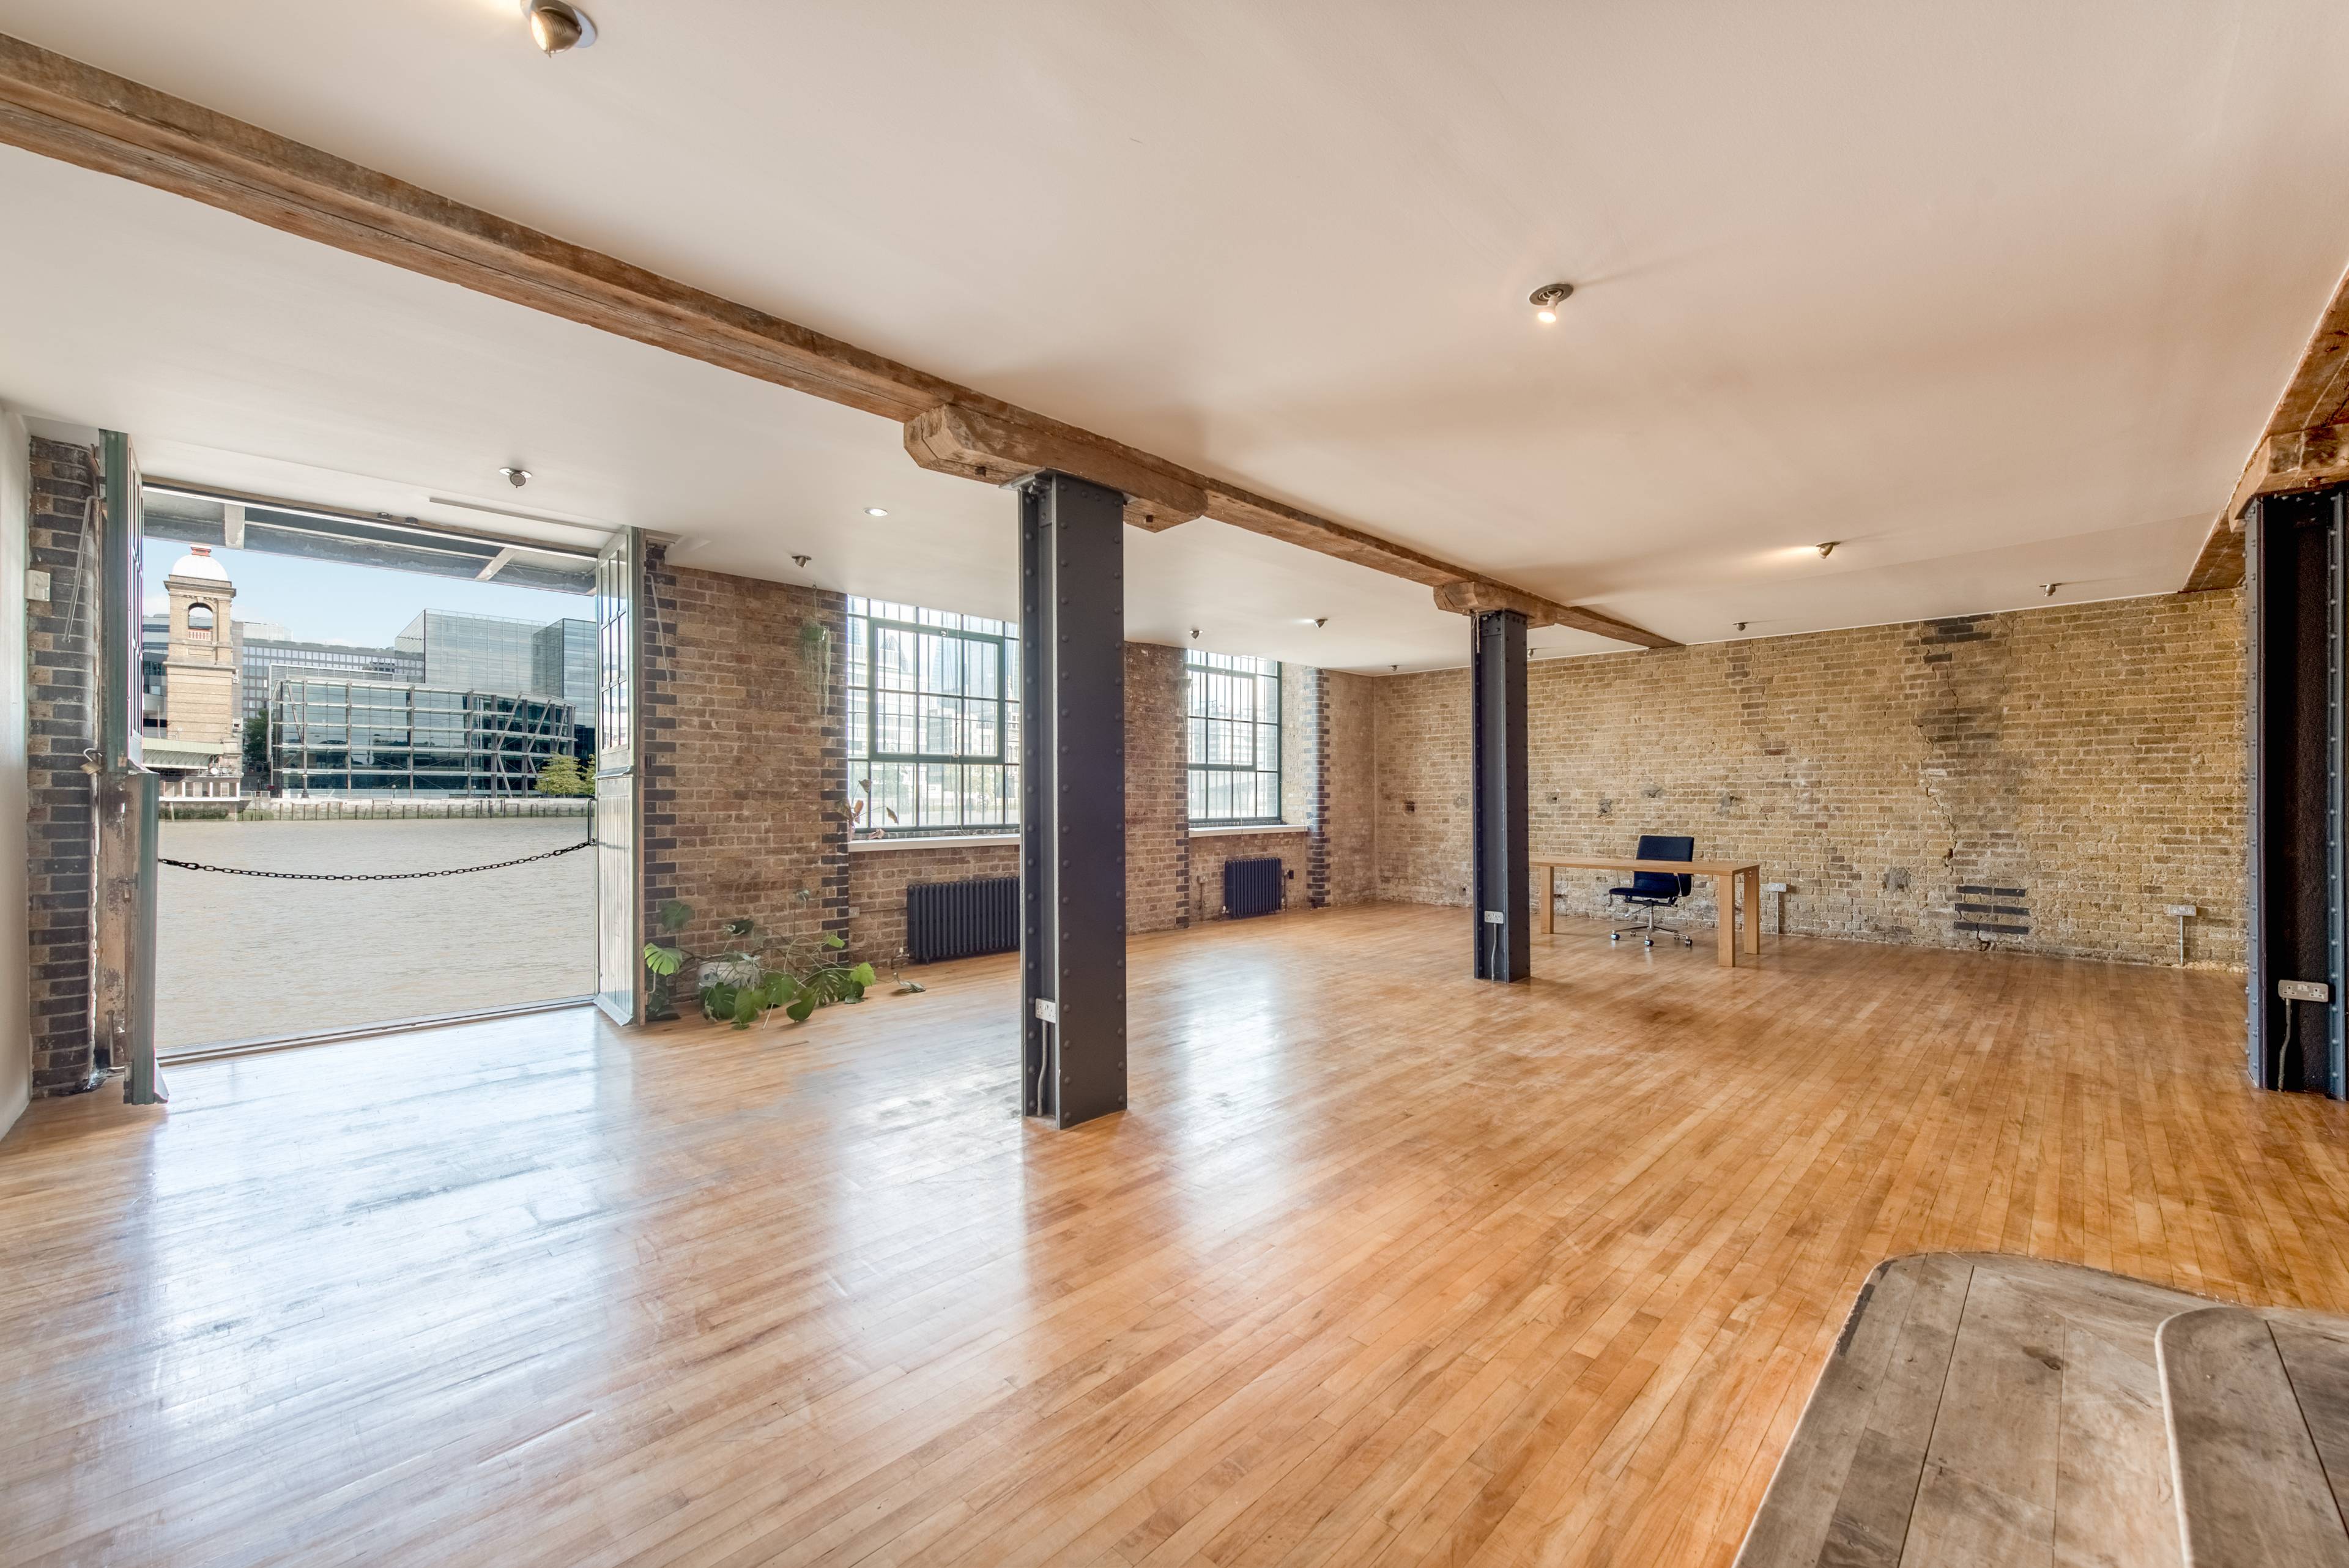 A Vast And Historic Warehouse Loft Apartment Spanning 3000 sqft, Directly On The River Thames, Situated on Clink Street Moments Away From Borough Market and London Bridge.